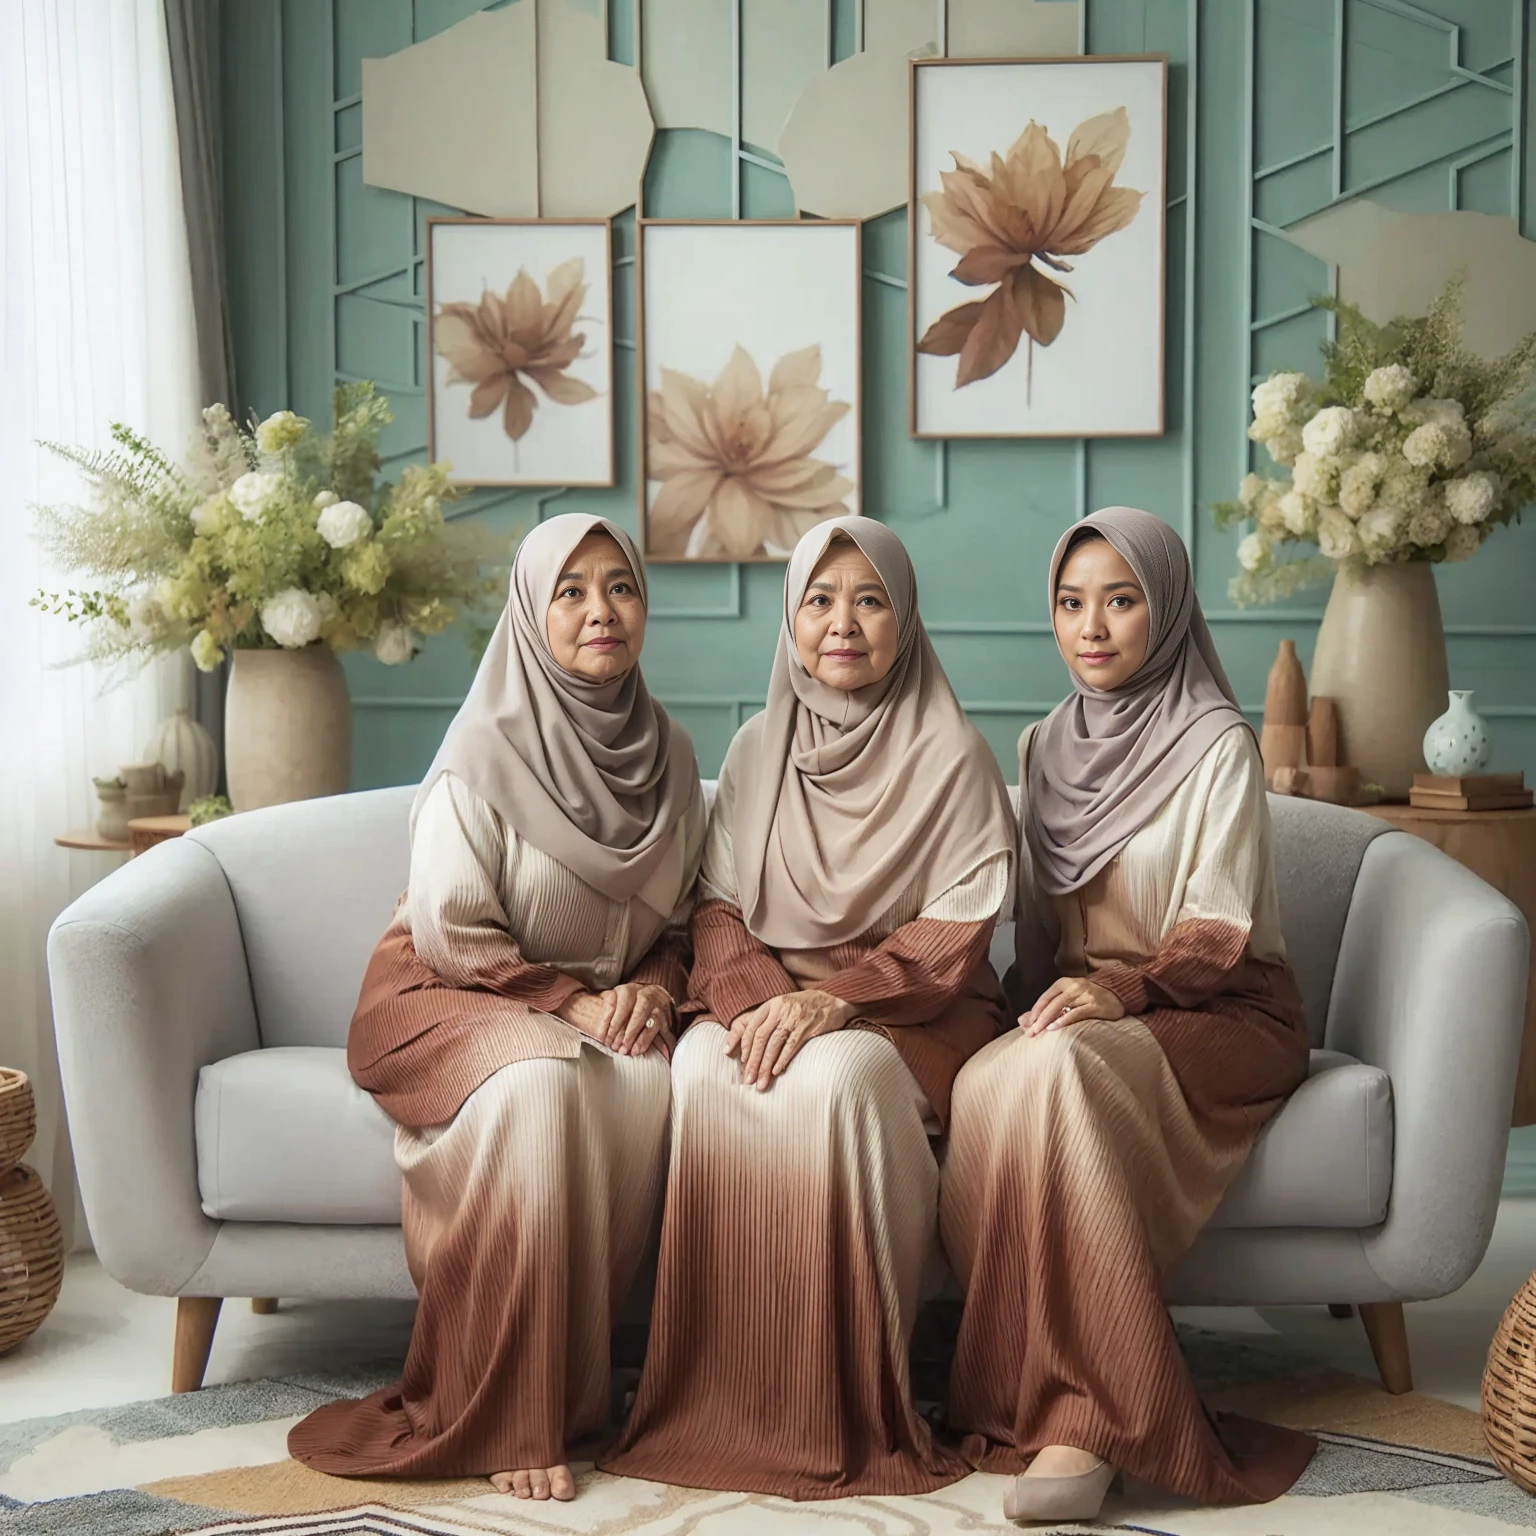 Studio Photography, 3 Indonesian women each aged 95, slightly overweight aged 50, and 25, sitting on a sofa, all wearing exclusive brown gradients white gamis Islamic sharia dress with pashmina long compliant hijab, set in a studio with modern abstract patterned walls, green flower vases, side tables, fresh color, 8k, photography, UHD.